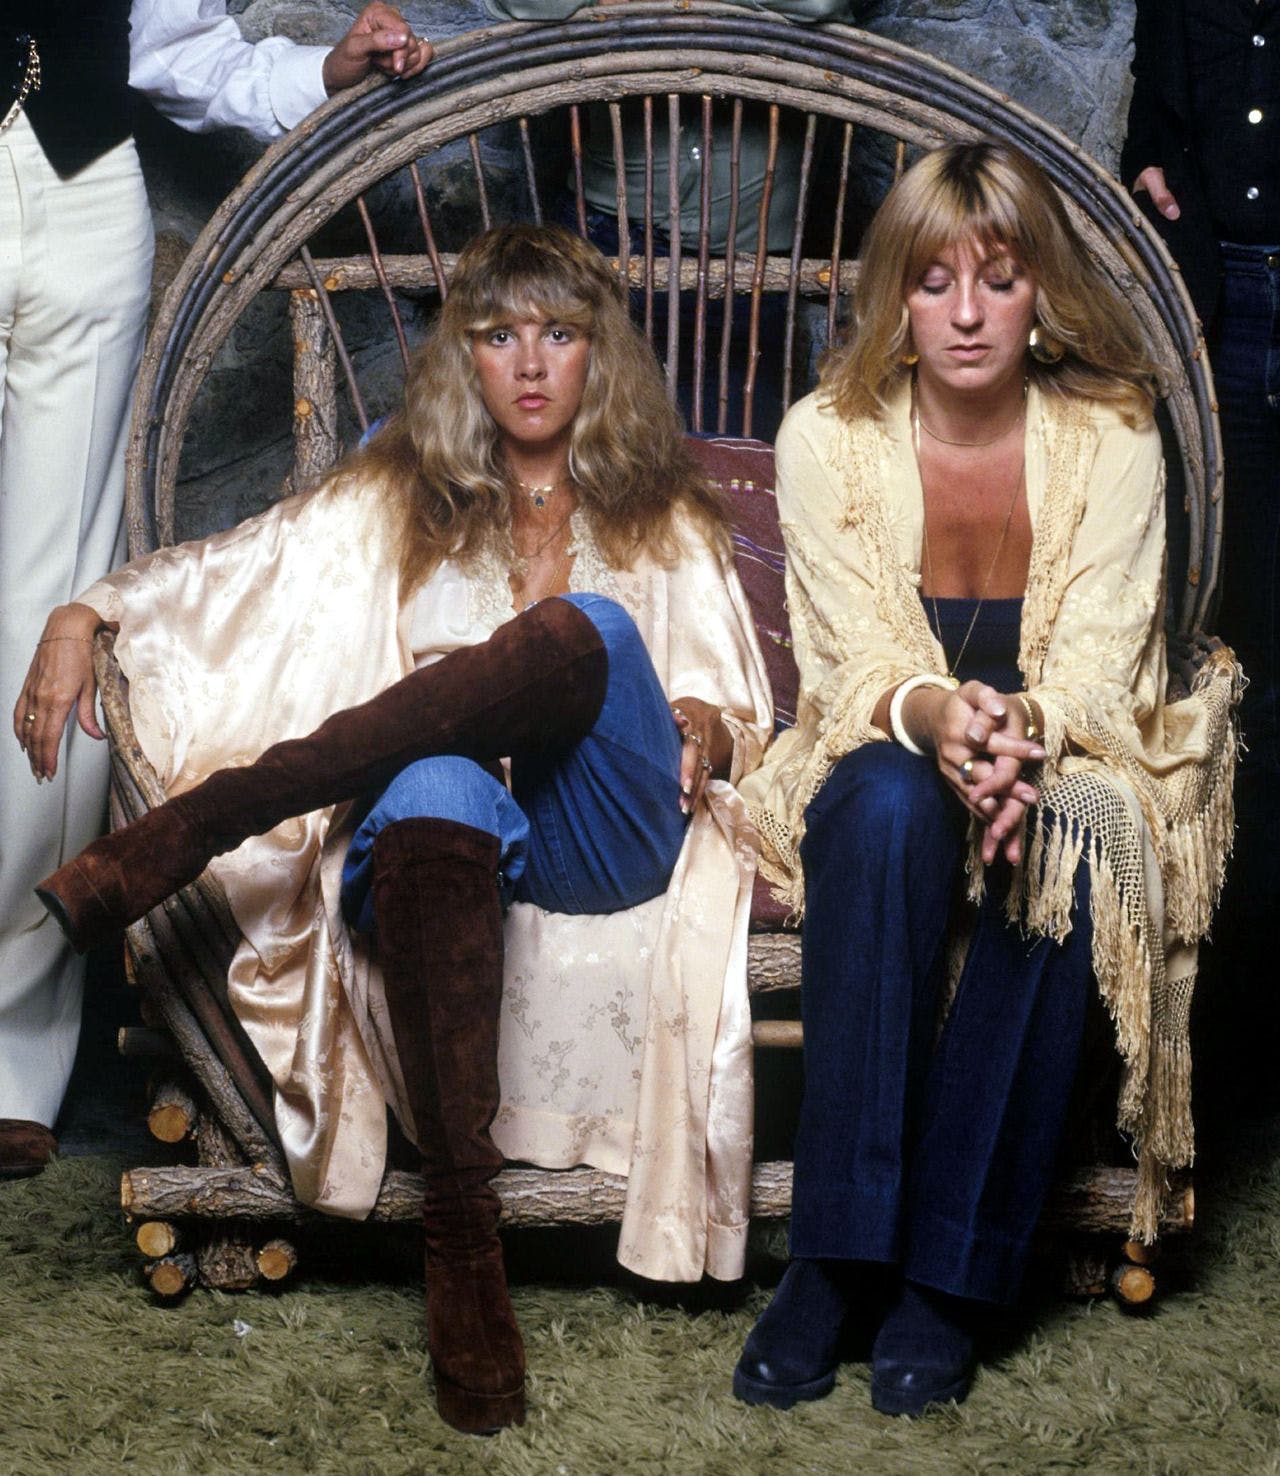 Rock legend Stevie Nicks and the style that goes with the years - 9